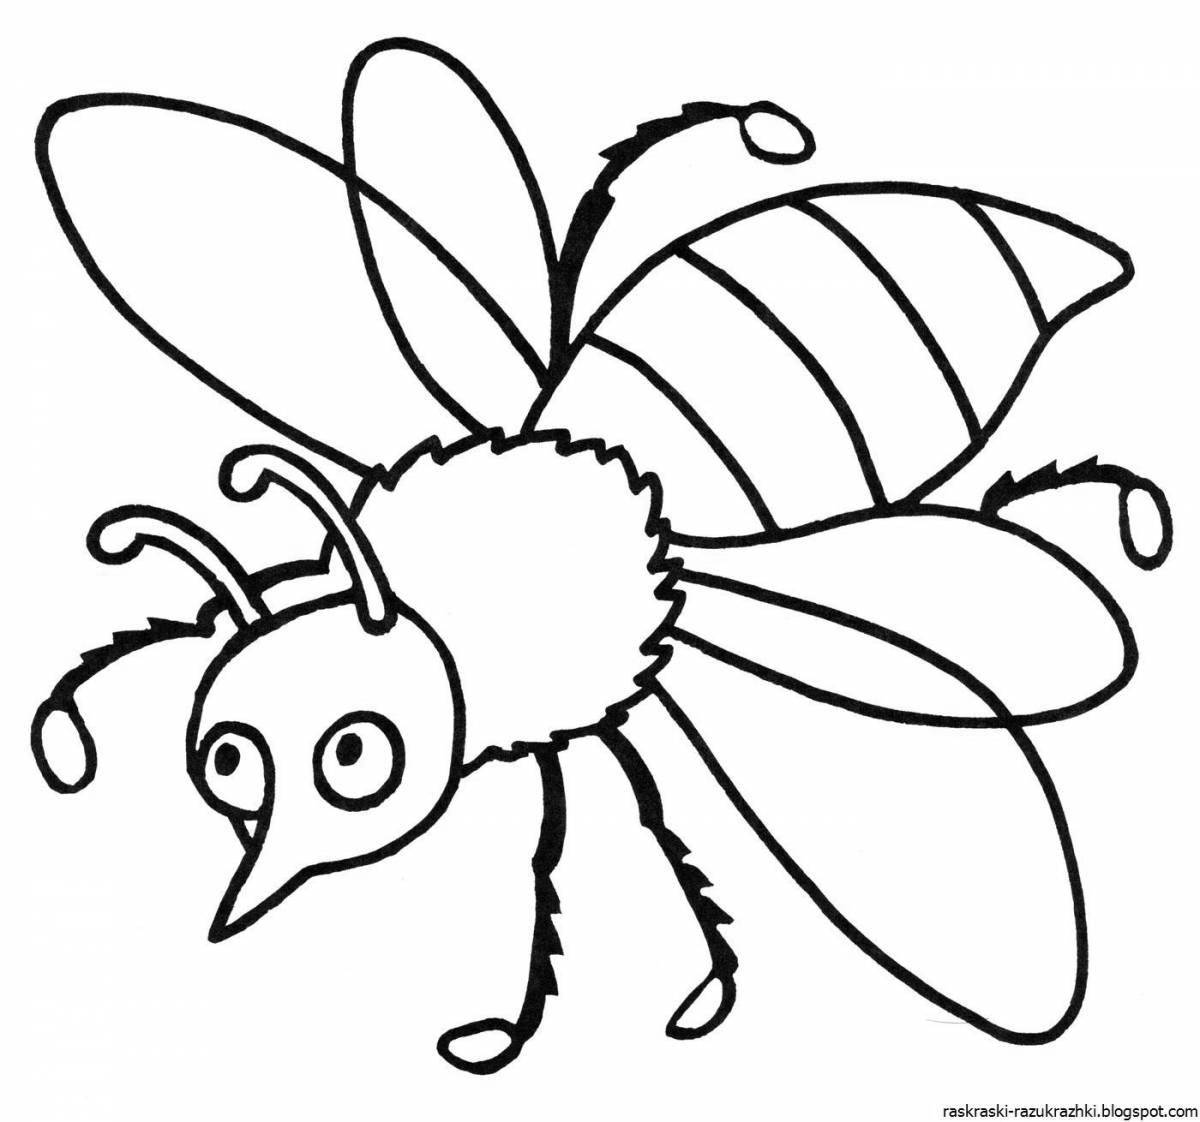 A fun bee coloring book for kids